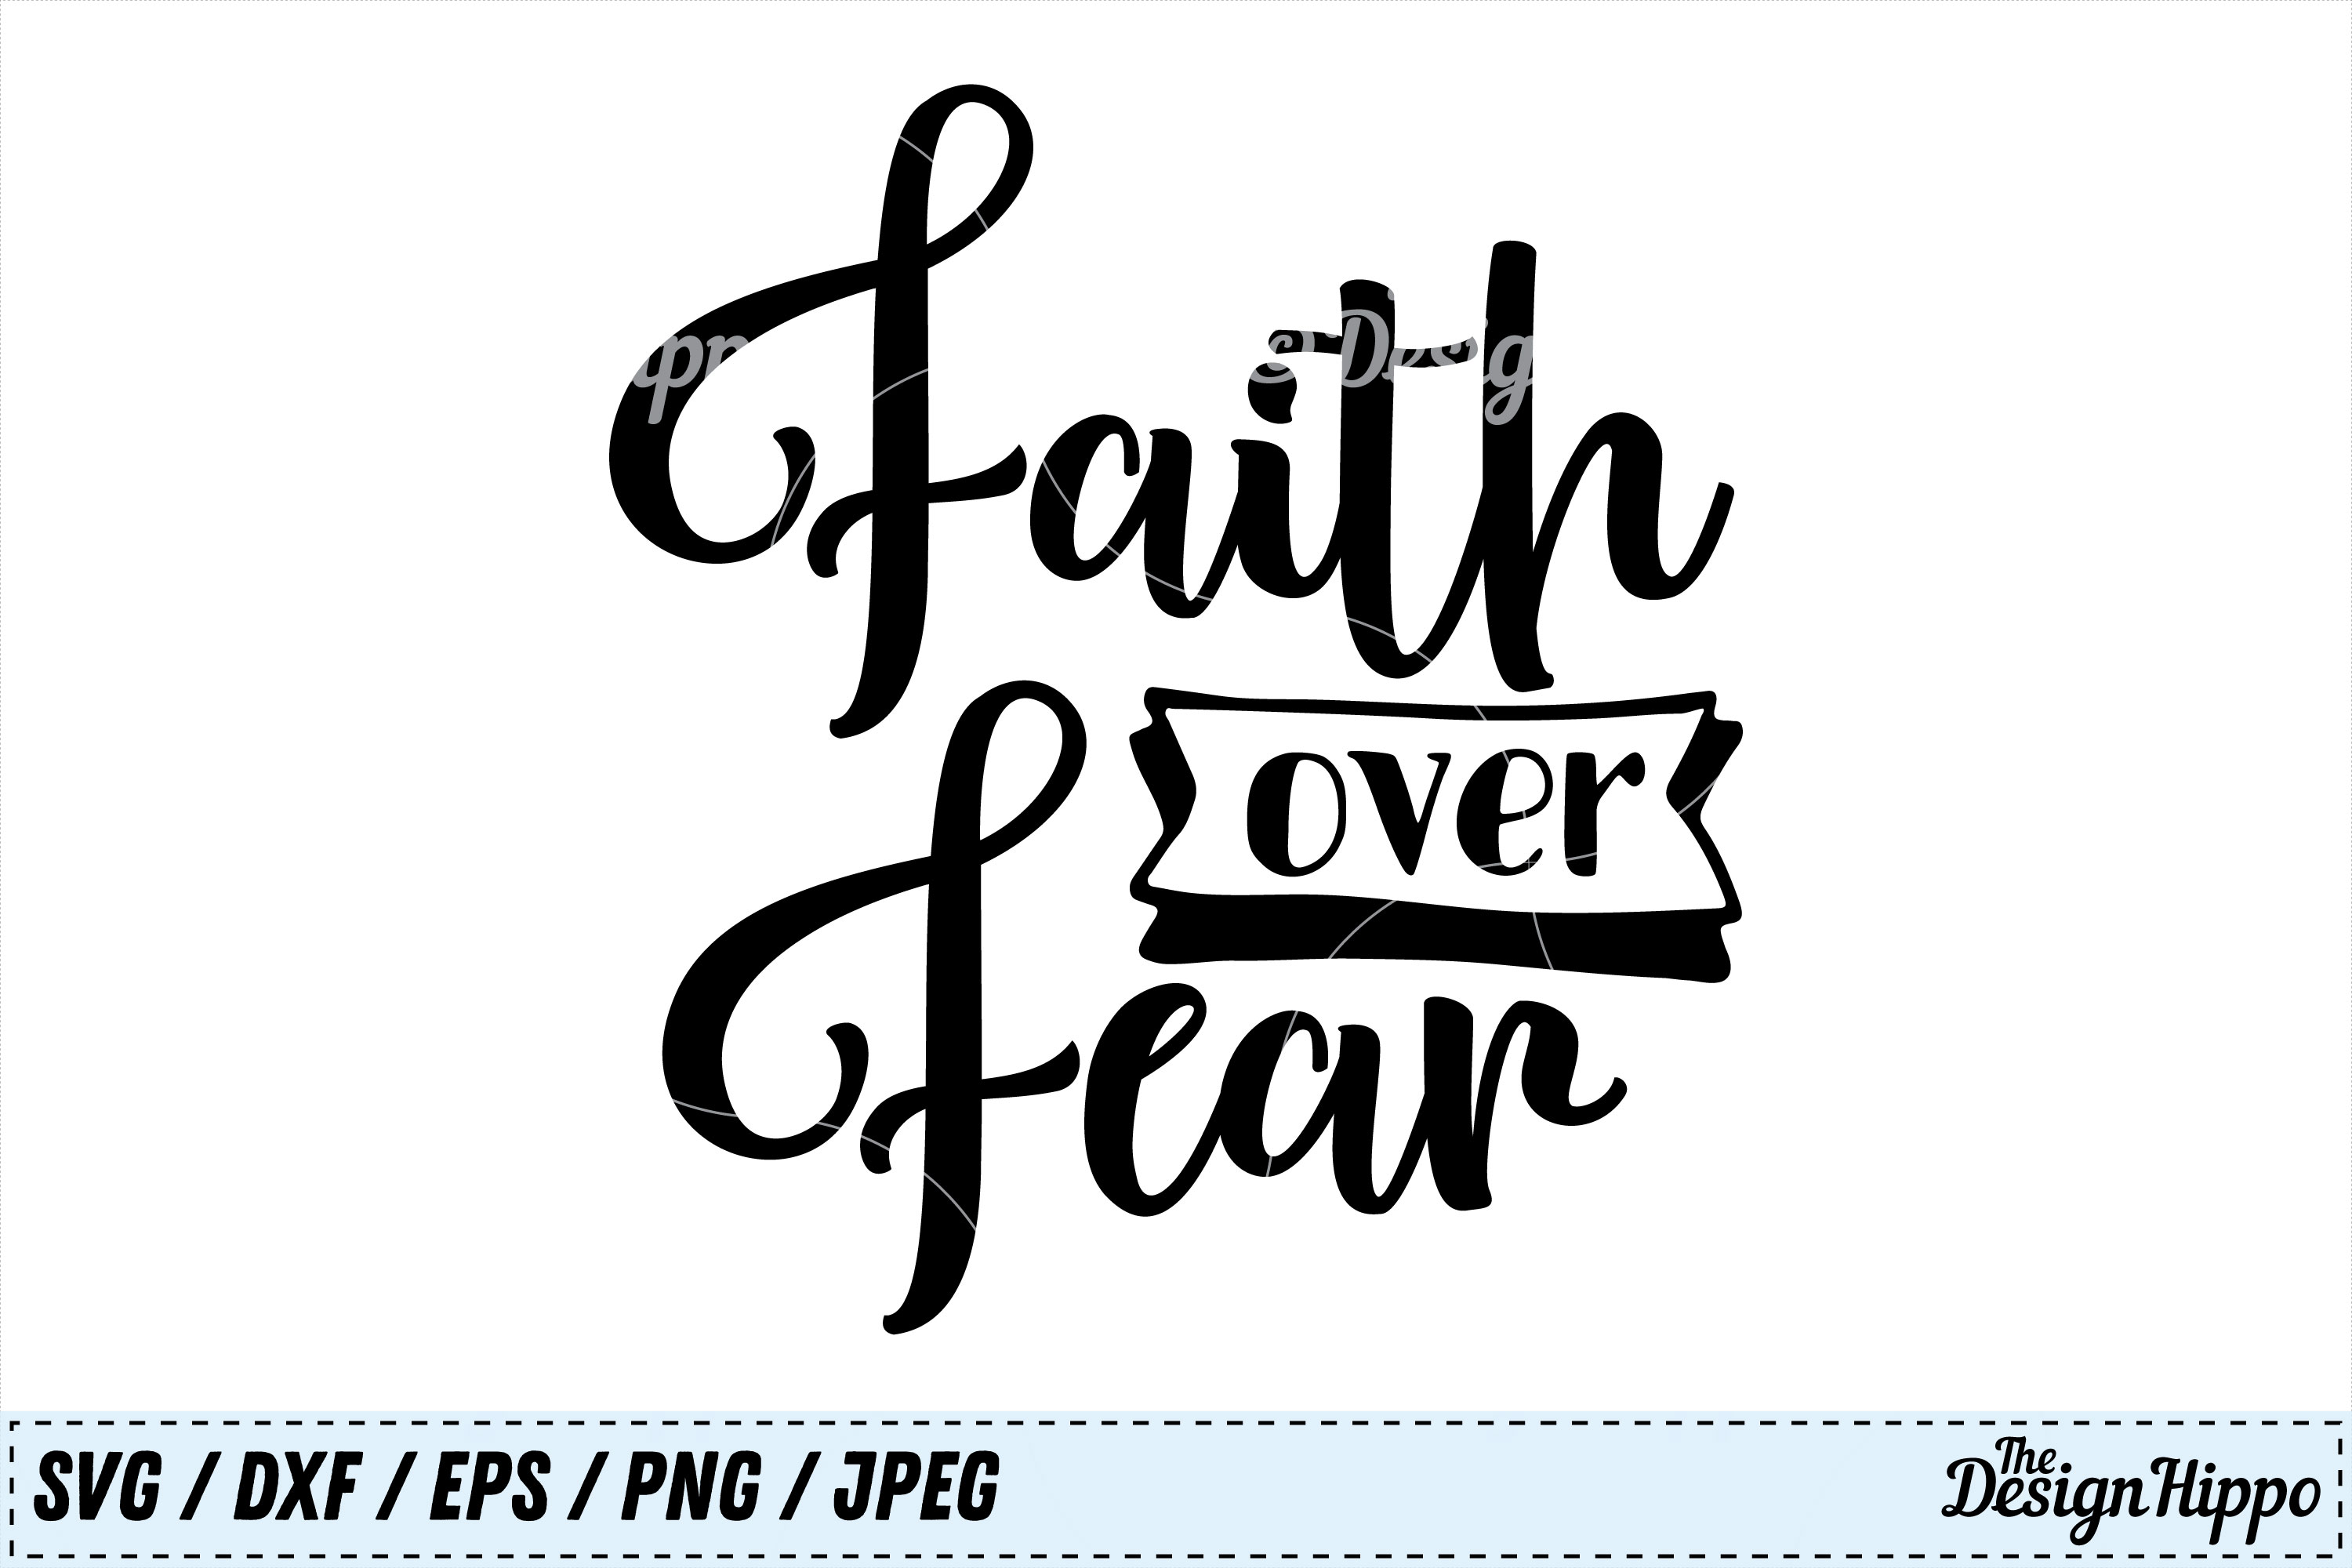 Download Faith Over Fear SVG, Faith SVG, Christian SVG, Bible, Quote